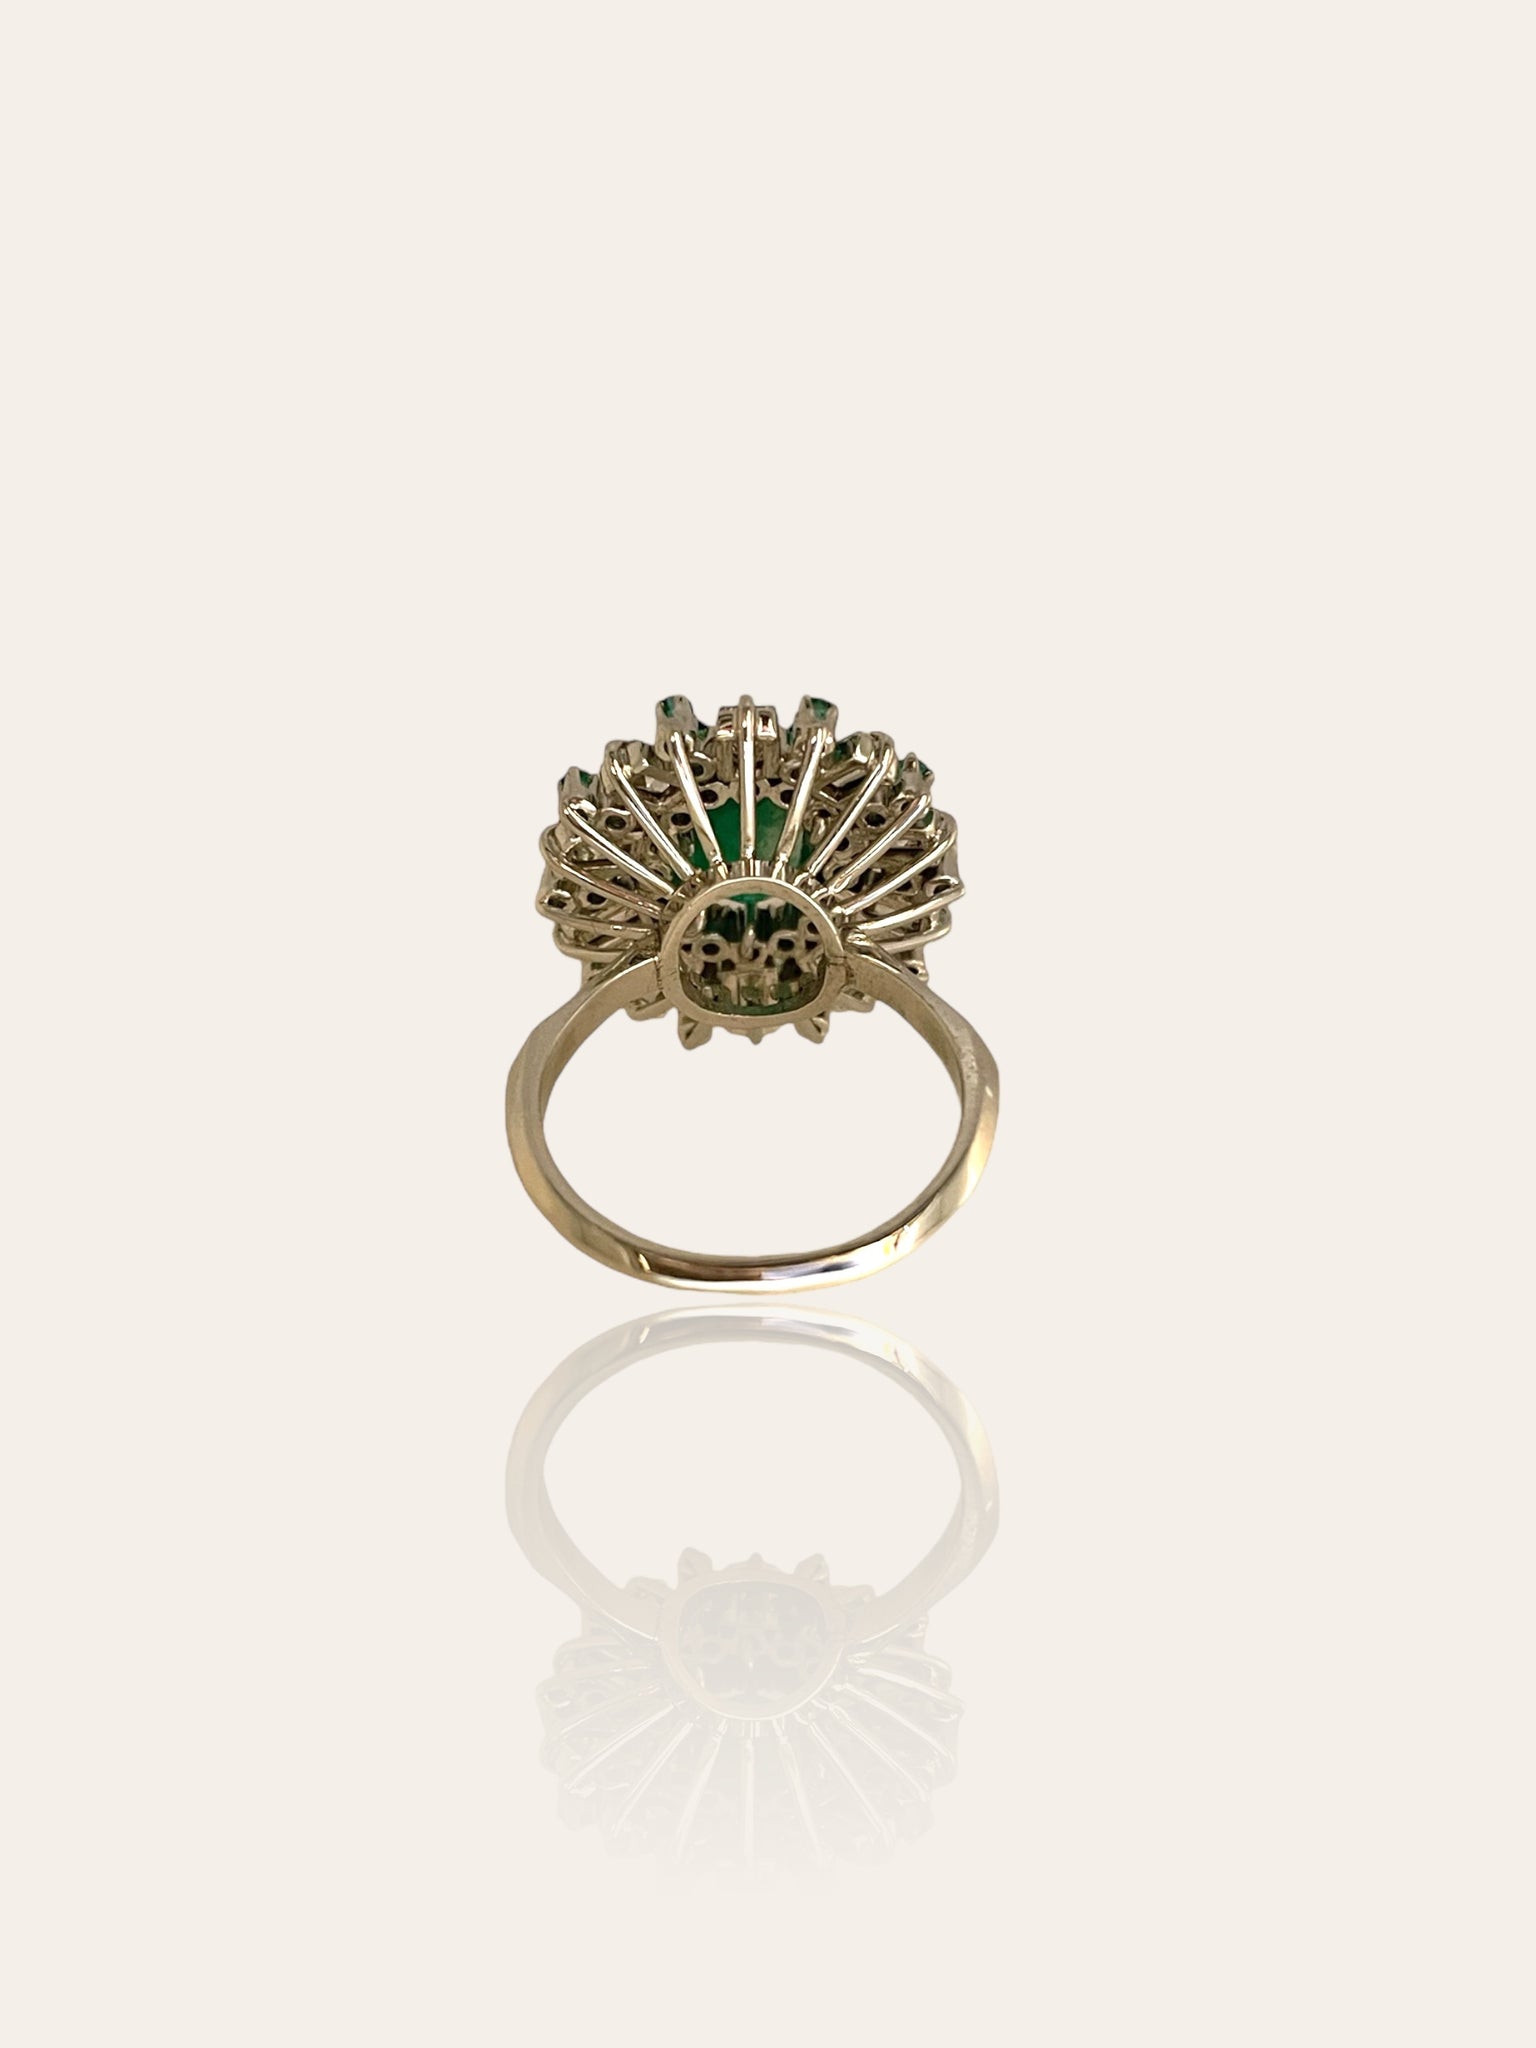 1960s/1970s white gold cocktail ring set with emerald, baguette and brilliant cut diamonds